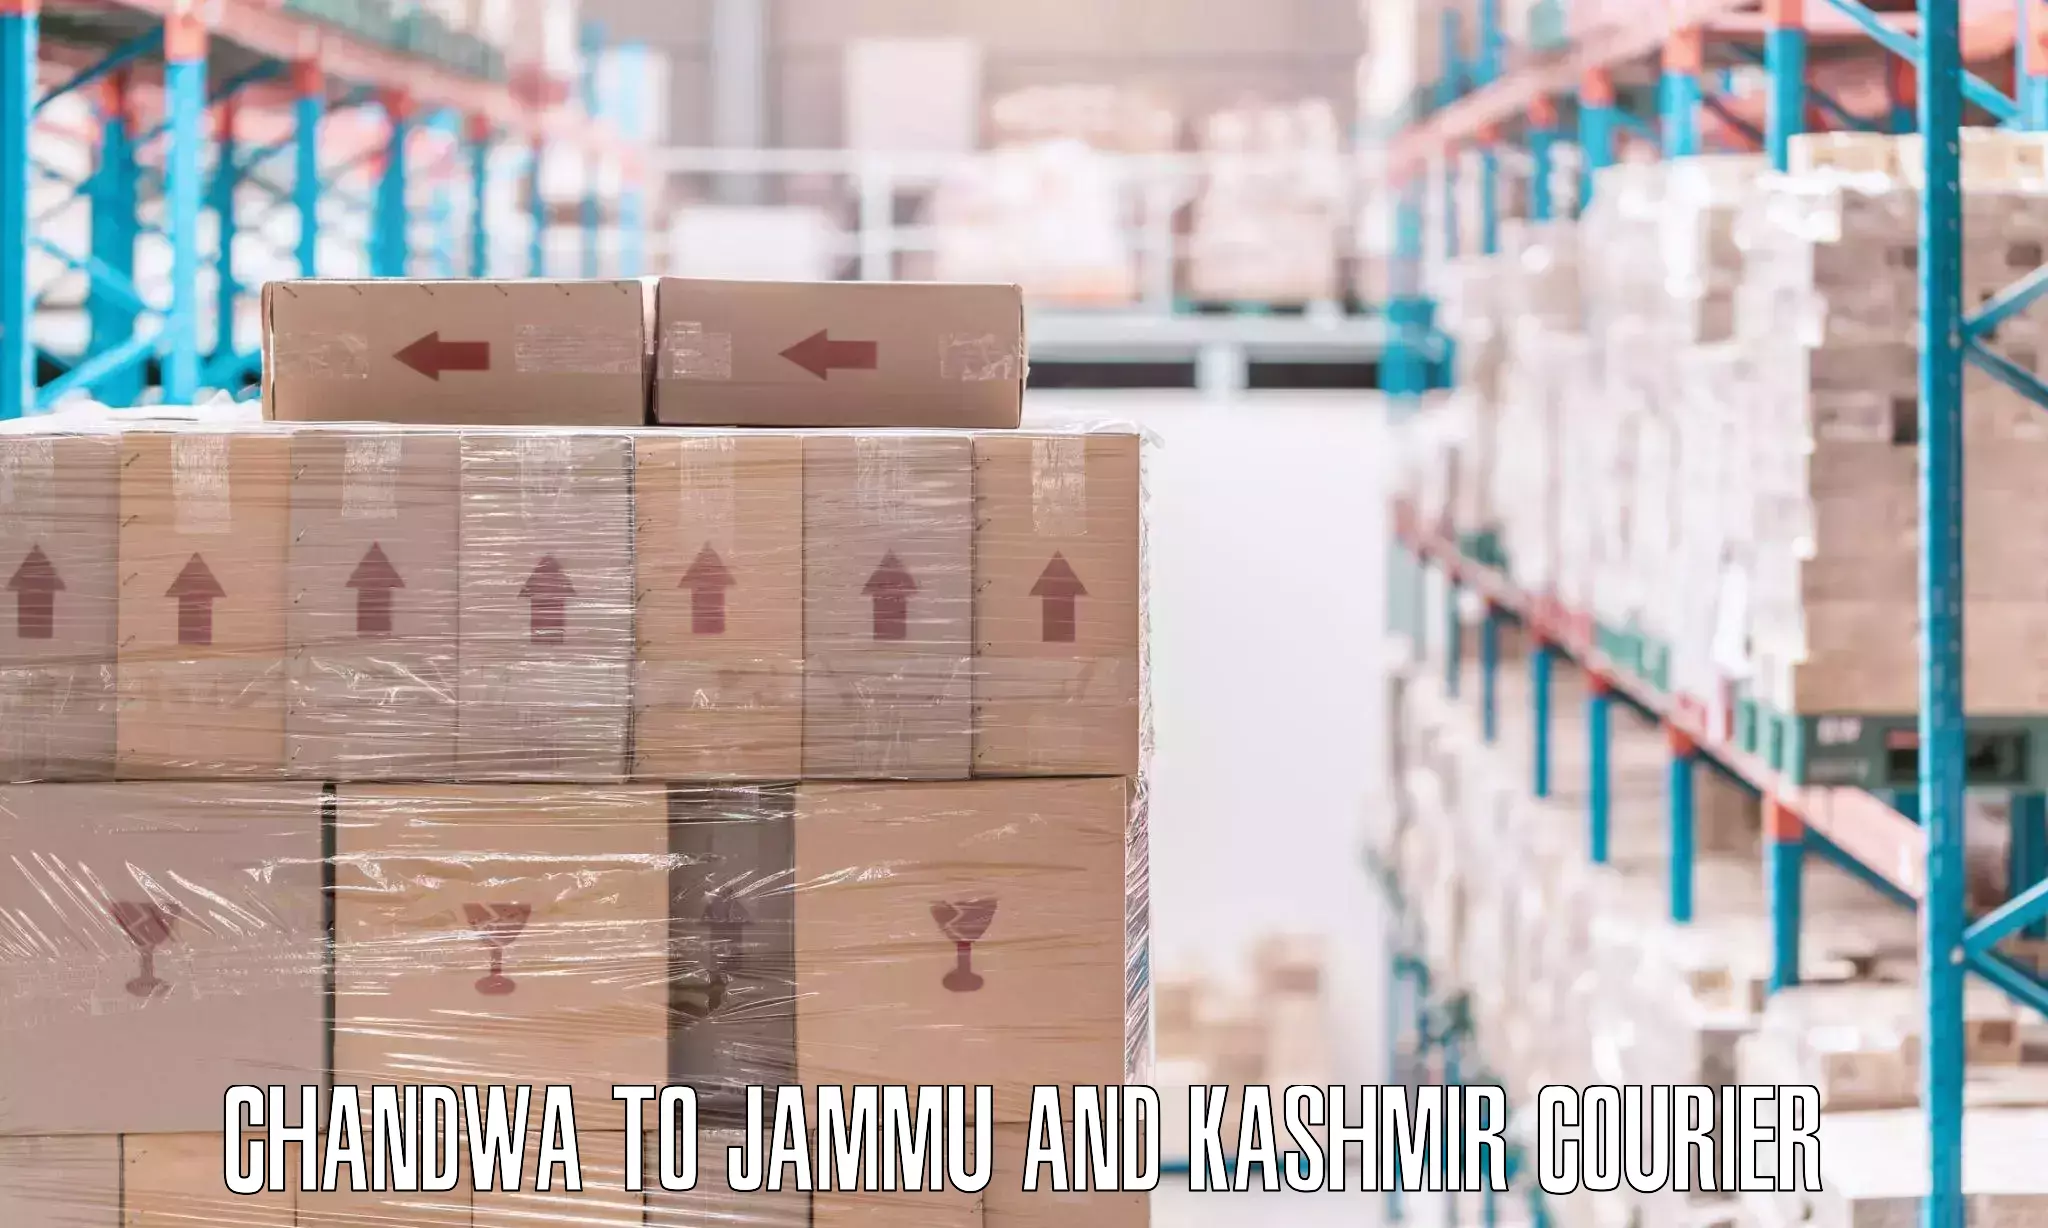 Expert packing and moving Chandwa to Jammu and Kashmir